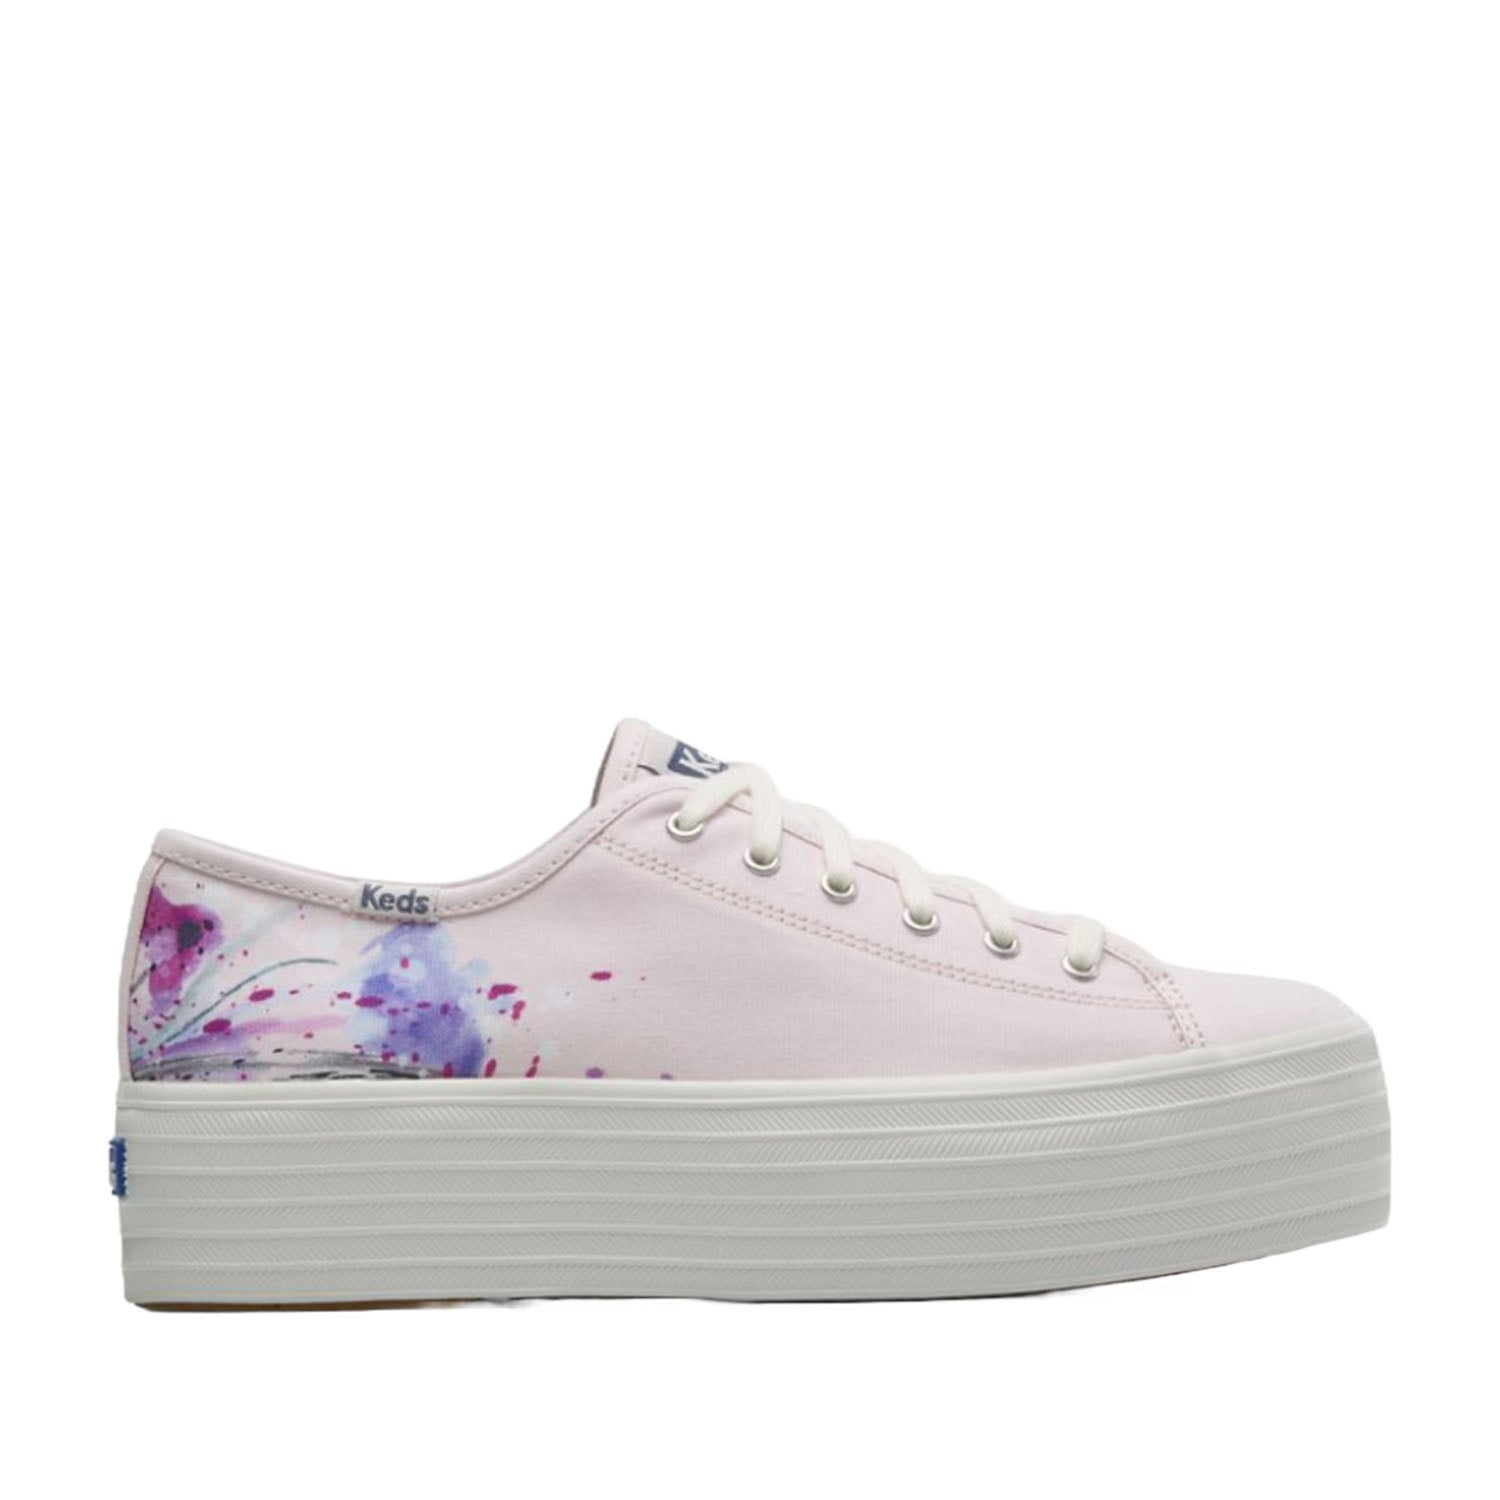 Keds Women's Triple Up Canvas Painterly Floral in Light Pink